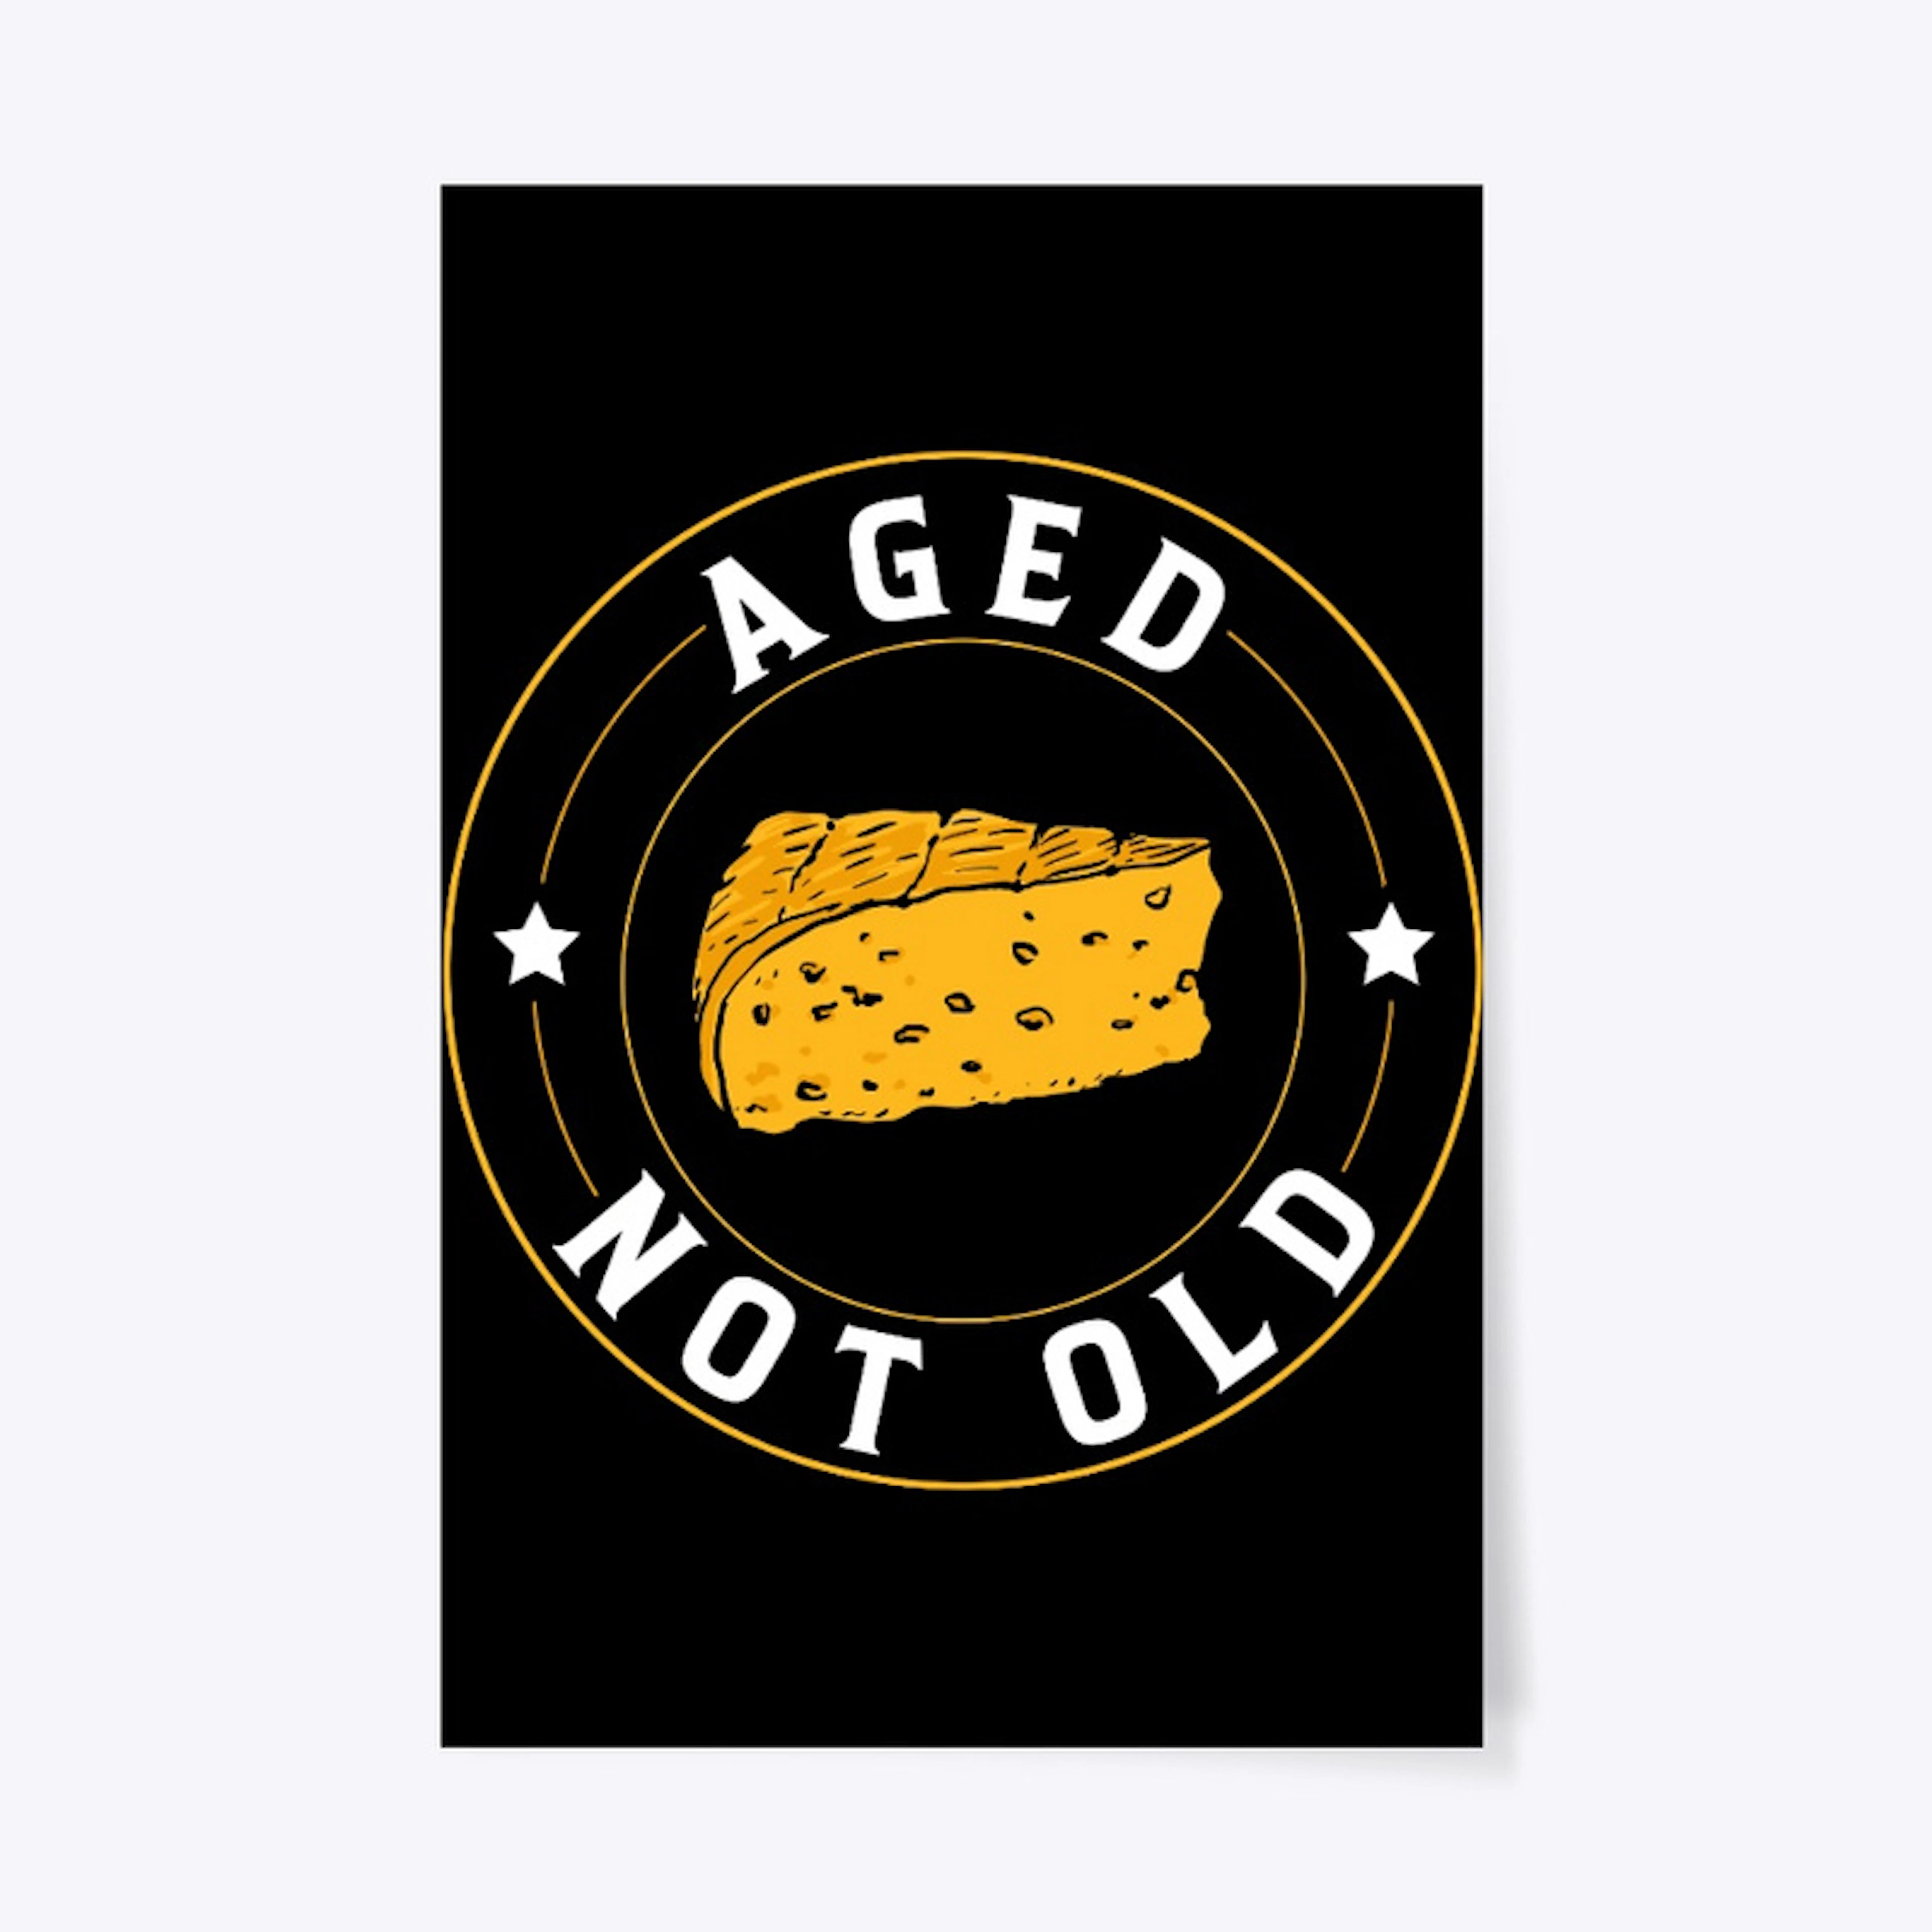 Aged Not Old